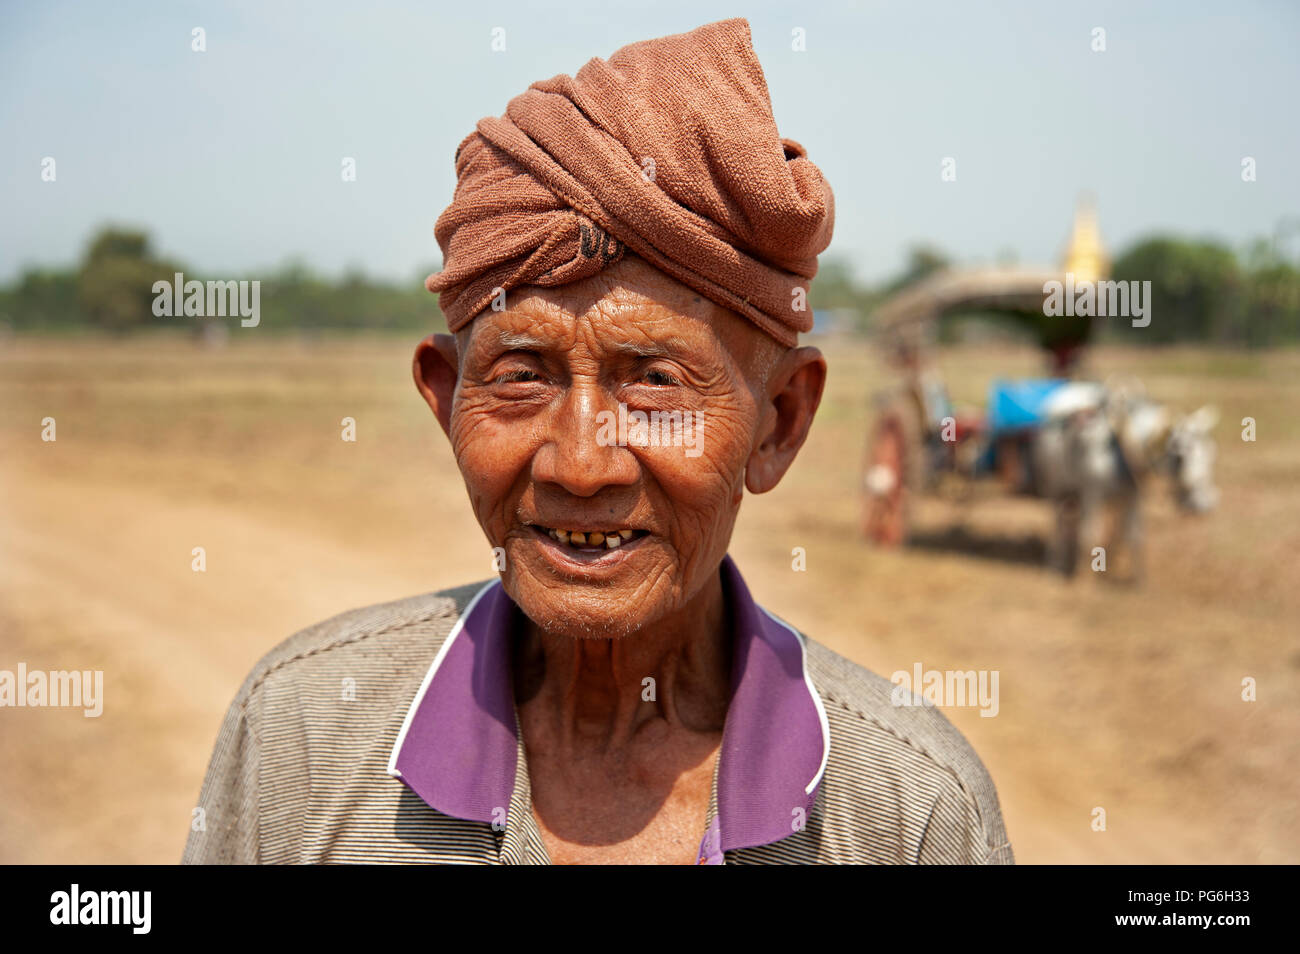 Portrait of an old Burmese man wearing a towel turban on his head with a horse and cart in the background Stock Photo